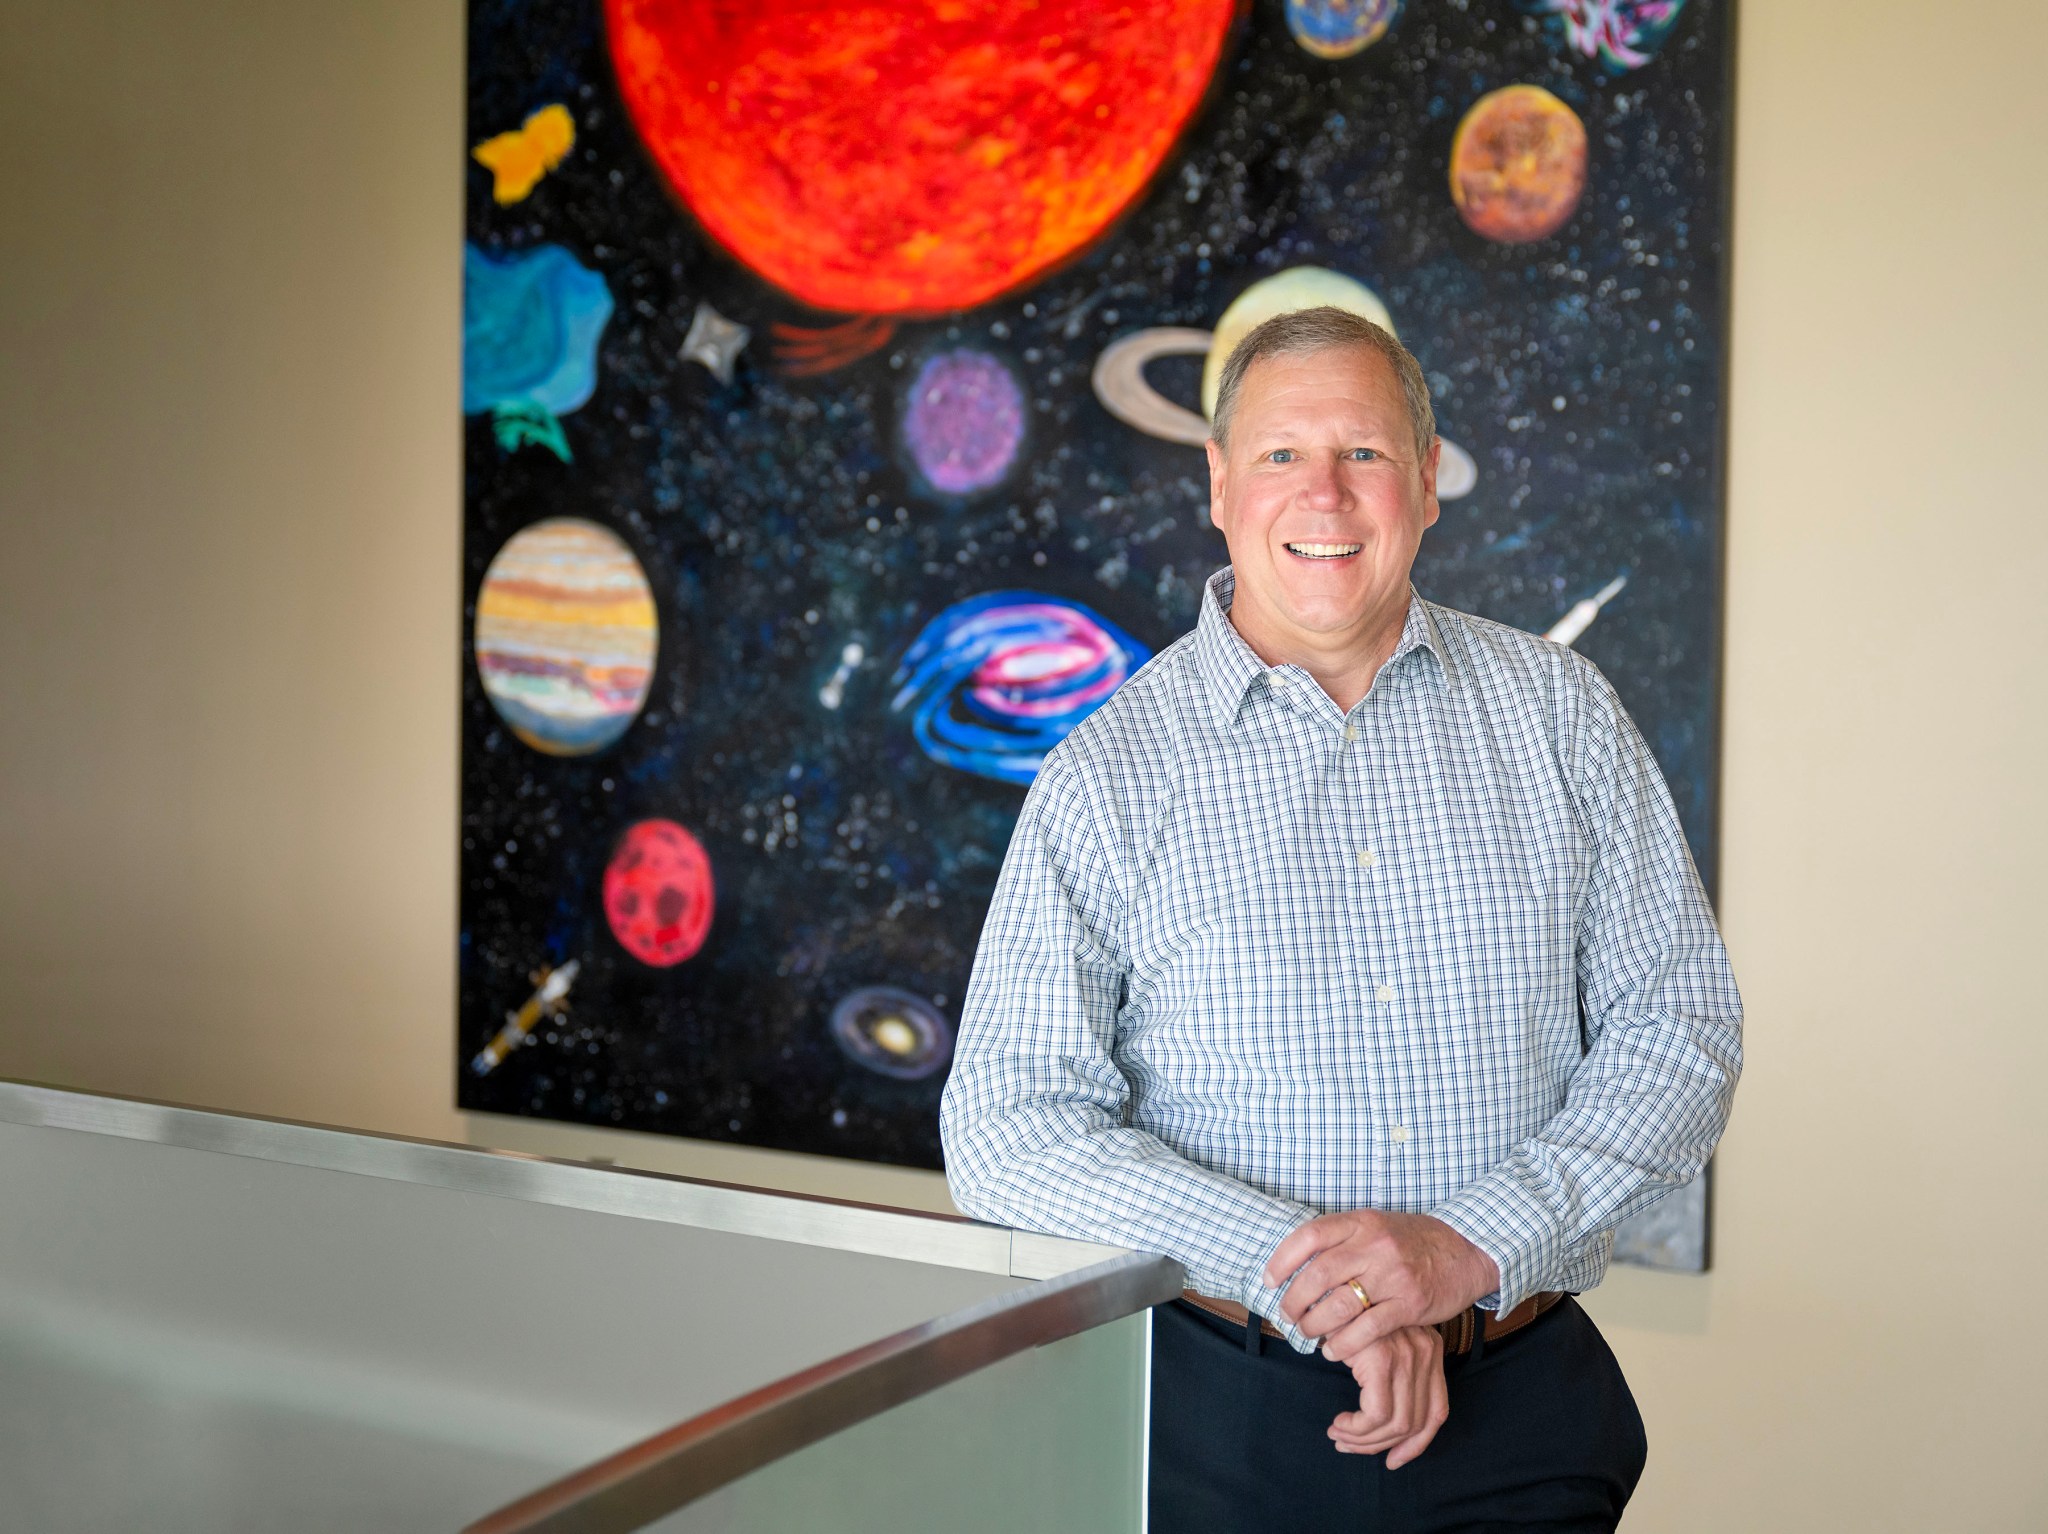 Mark Richards is deputy director of the Office of Strategic Analysis and Communications (OSAC) at NASAs Marshall Space Flight Center.